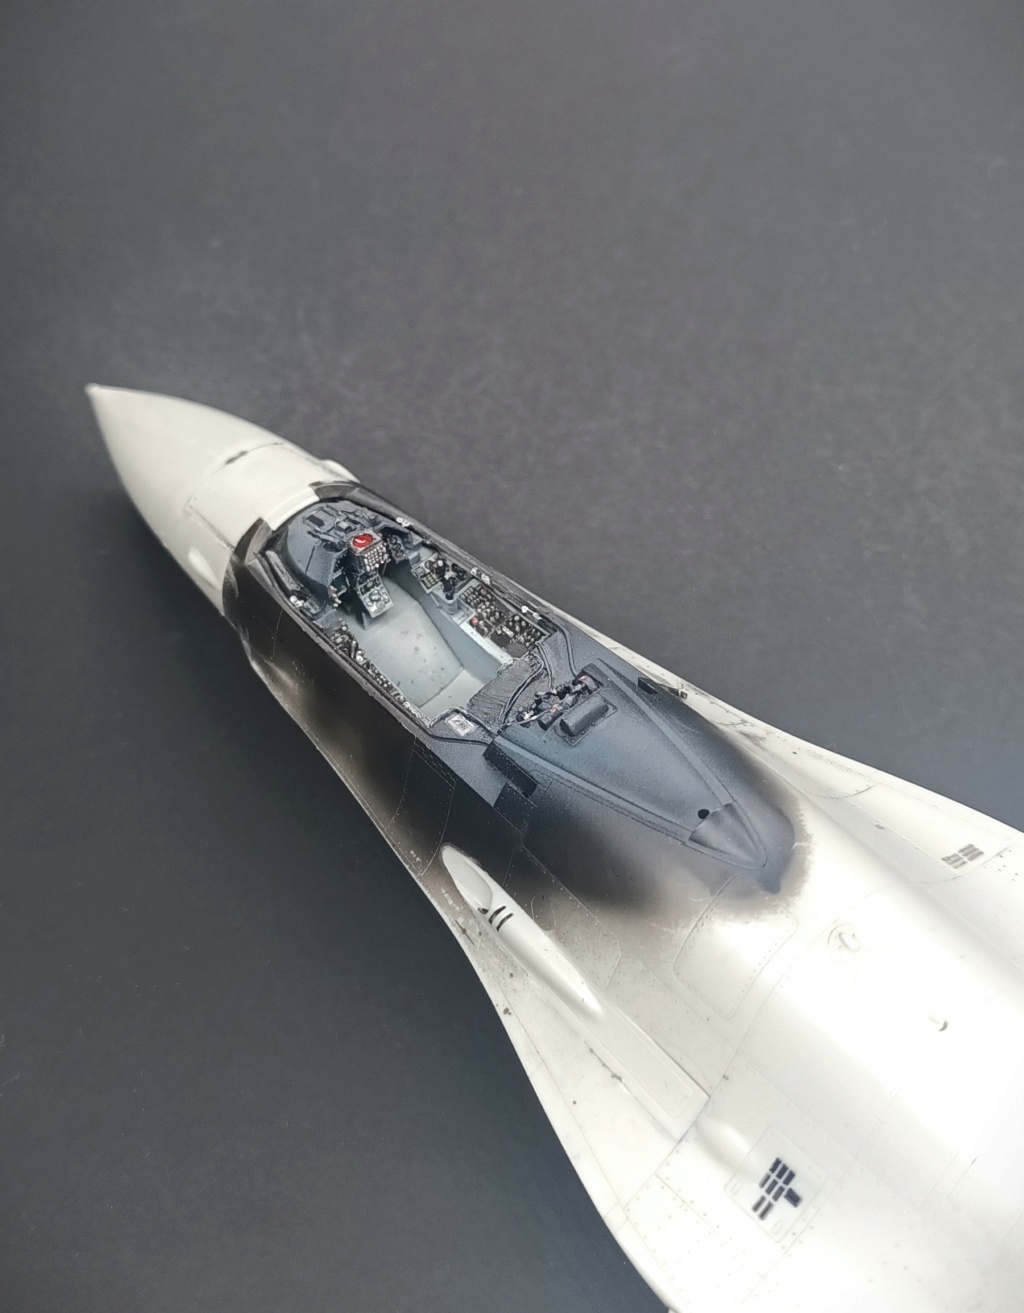 [Kinetic] 1/48  - McDonnell F/A-18A+ Hornet- VFC 12   / Double  [Tamiya] General Dynamics F-16C Fighting Falcon - 64th AGRS  1/48  - Aggressor - Page 3 20240211